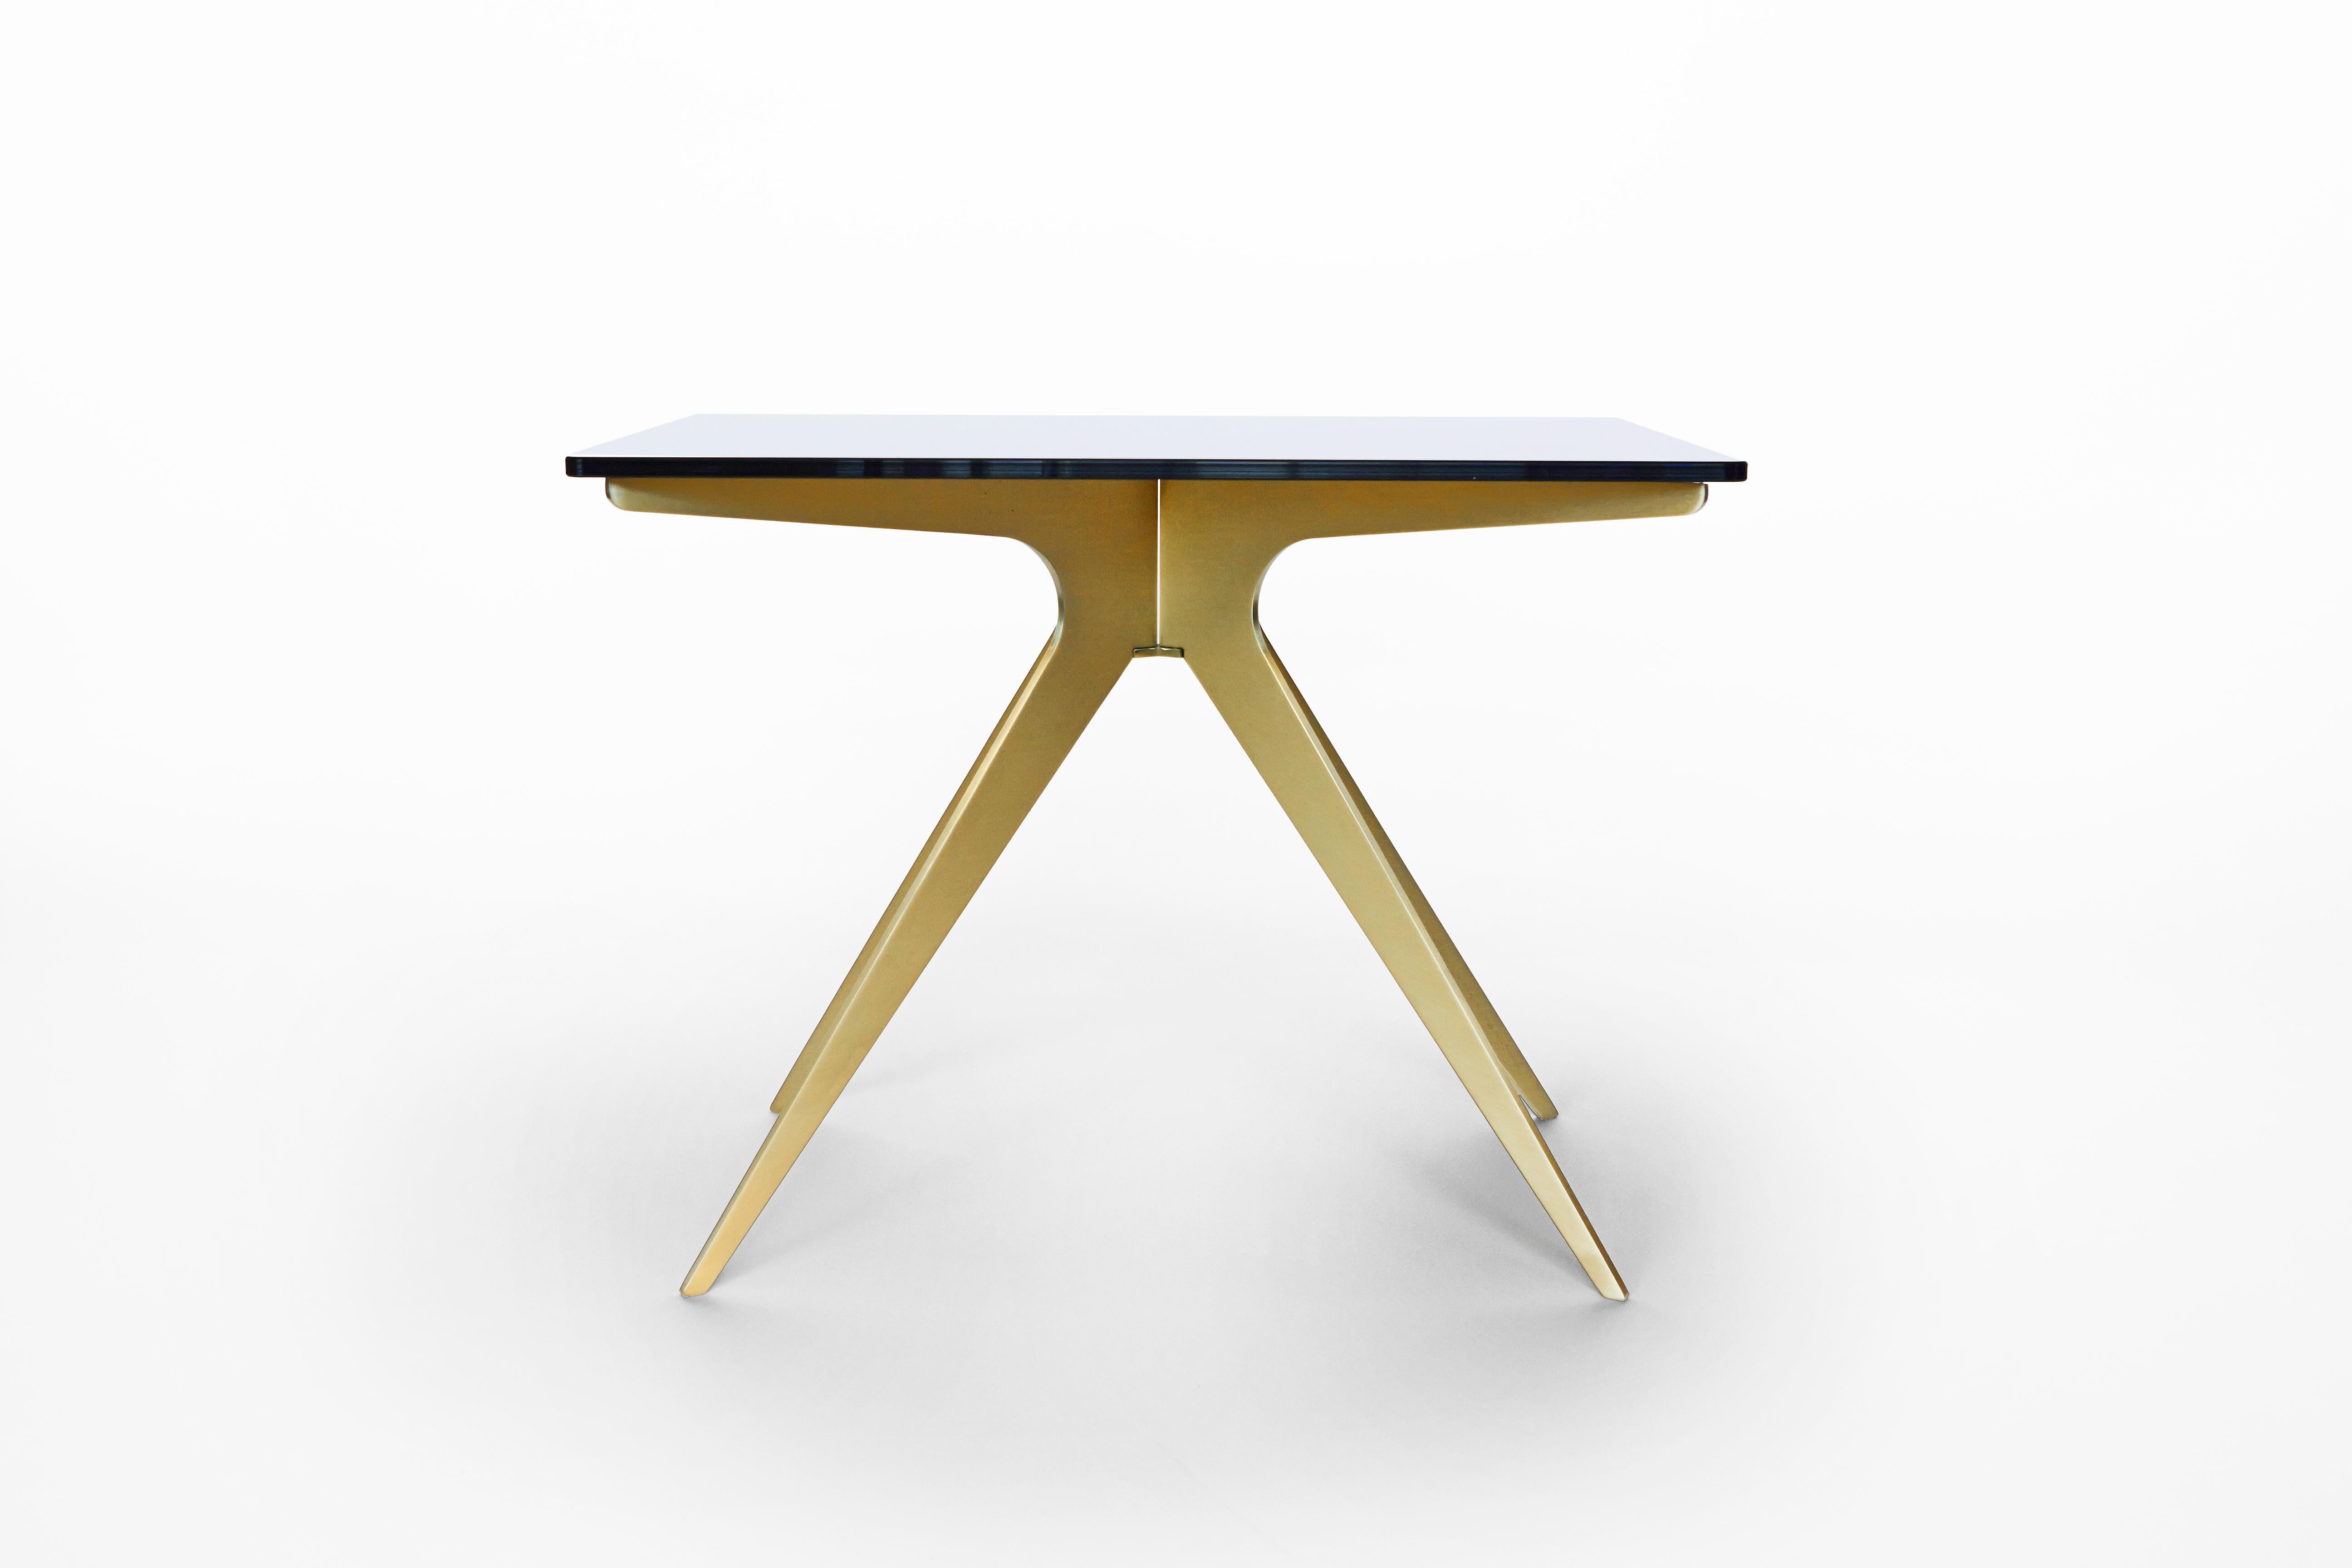 Gray (Smoked Glass) Dean Rectangular Side Table in Satin Brass Base and Glass Top by Gabriel Scott 2